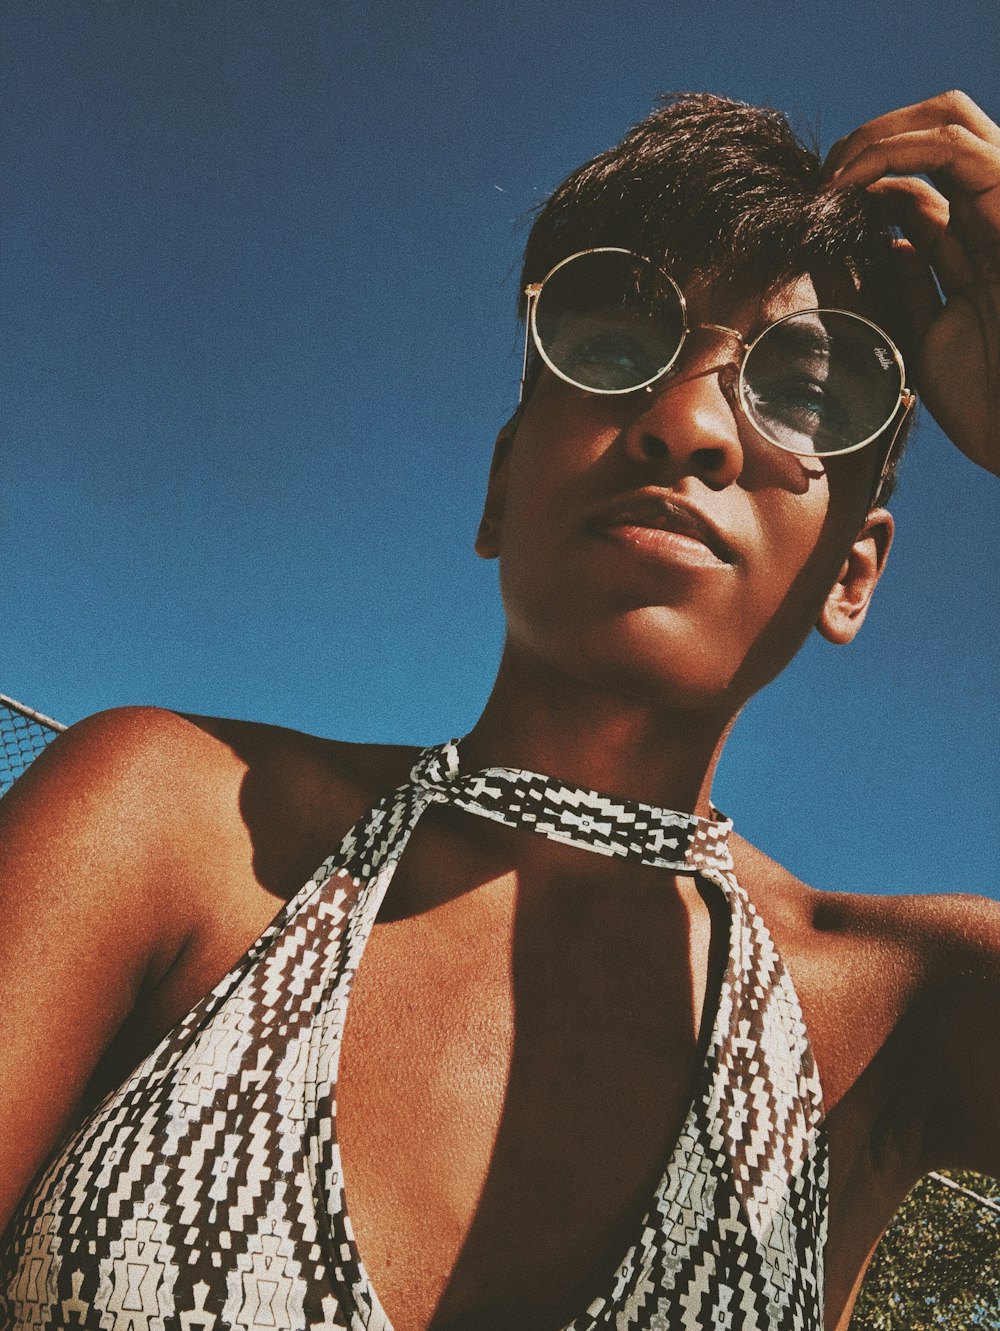 a woman wearing sunglasses and a halter top